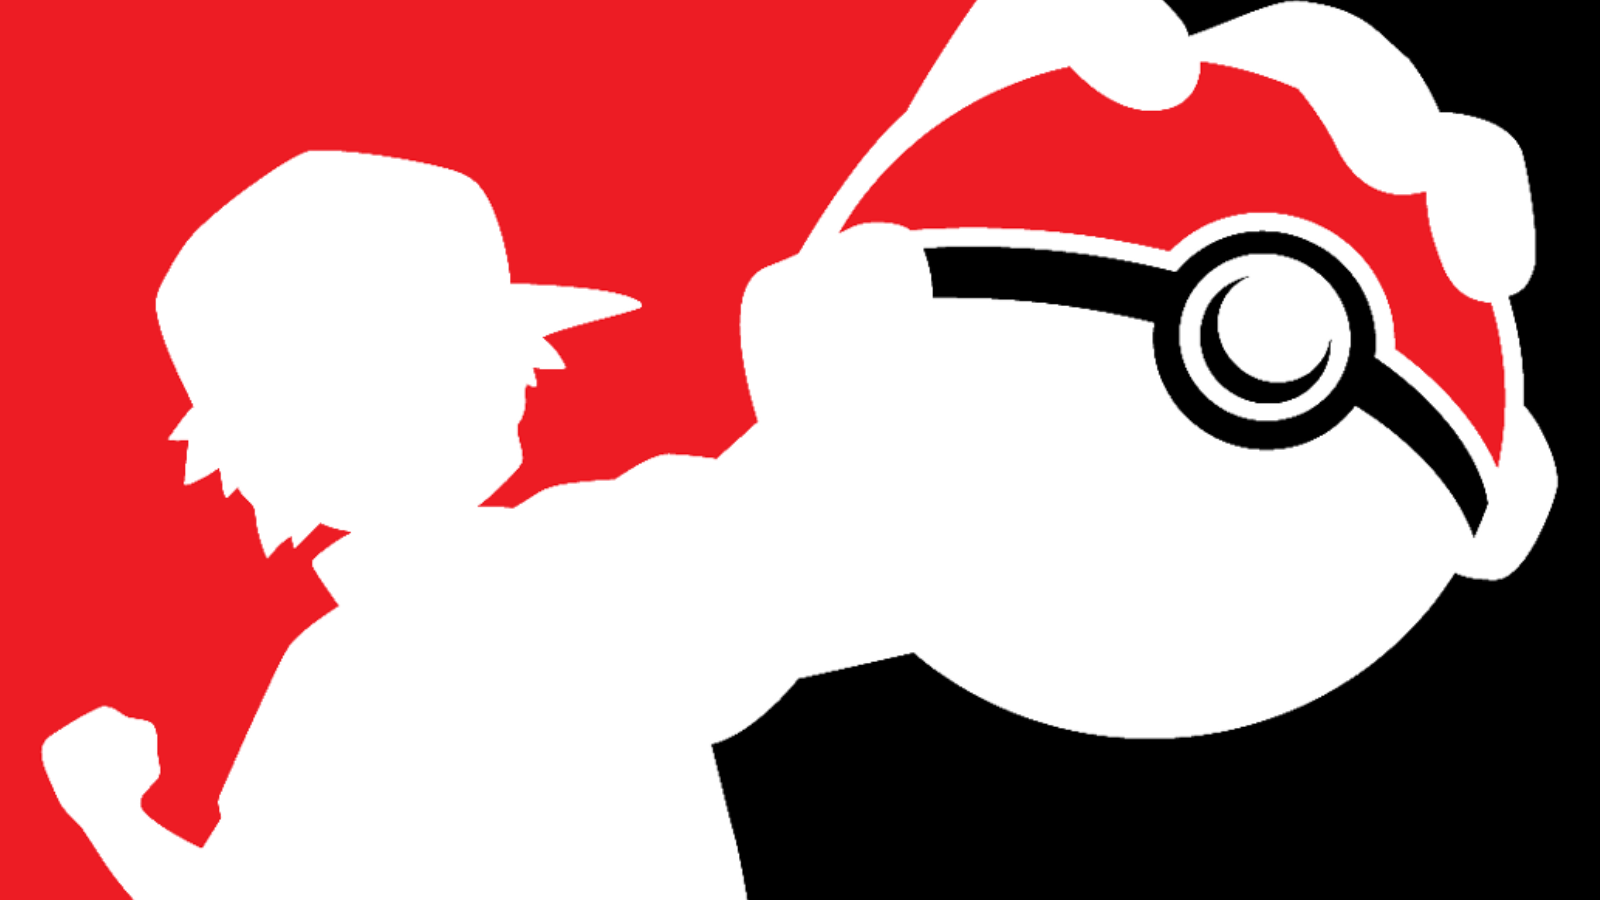 Go play! Pokemon break out the silence on champion after antisemitic accusations